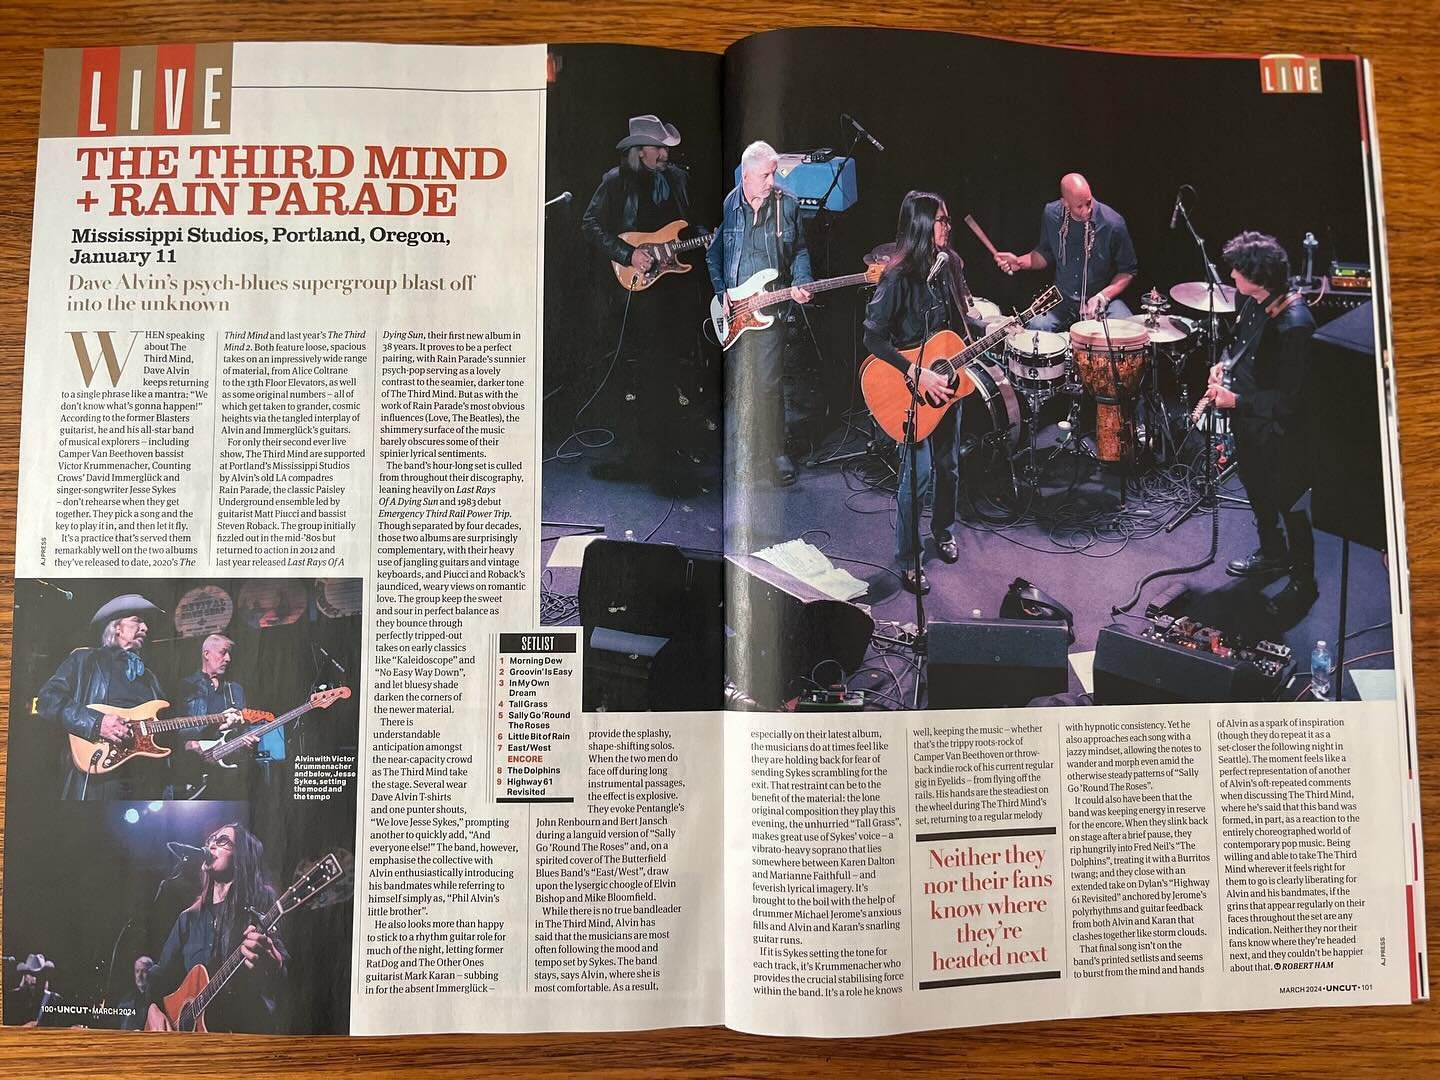 &ldquo;Dave Alvin&rsquo;s psych-blues supergroup blast off into the unknown&rdquo;

&ldquo;Neither they nor their fans know where they&rsquo;re headed next&rdquo;

Thank you, Robert Ham and @uncut_magazine for the PDX concert review (the first show o